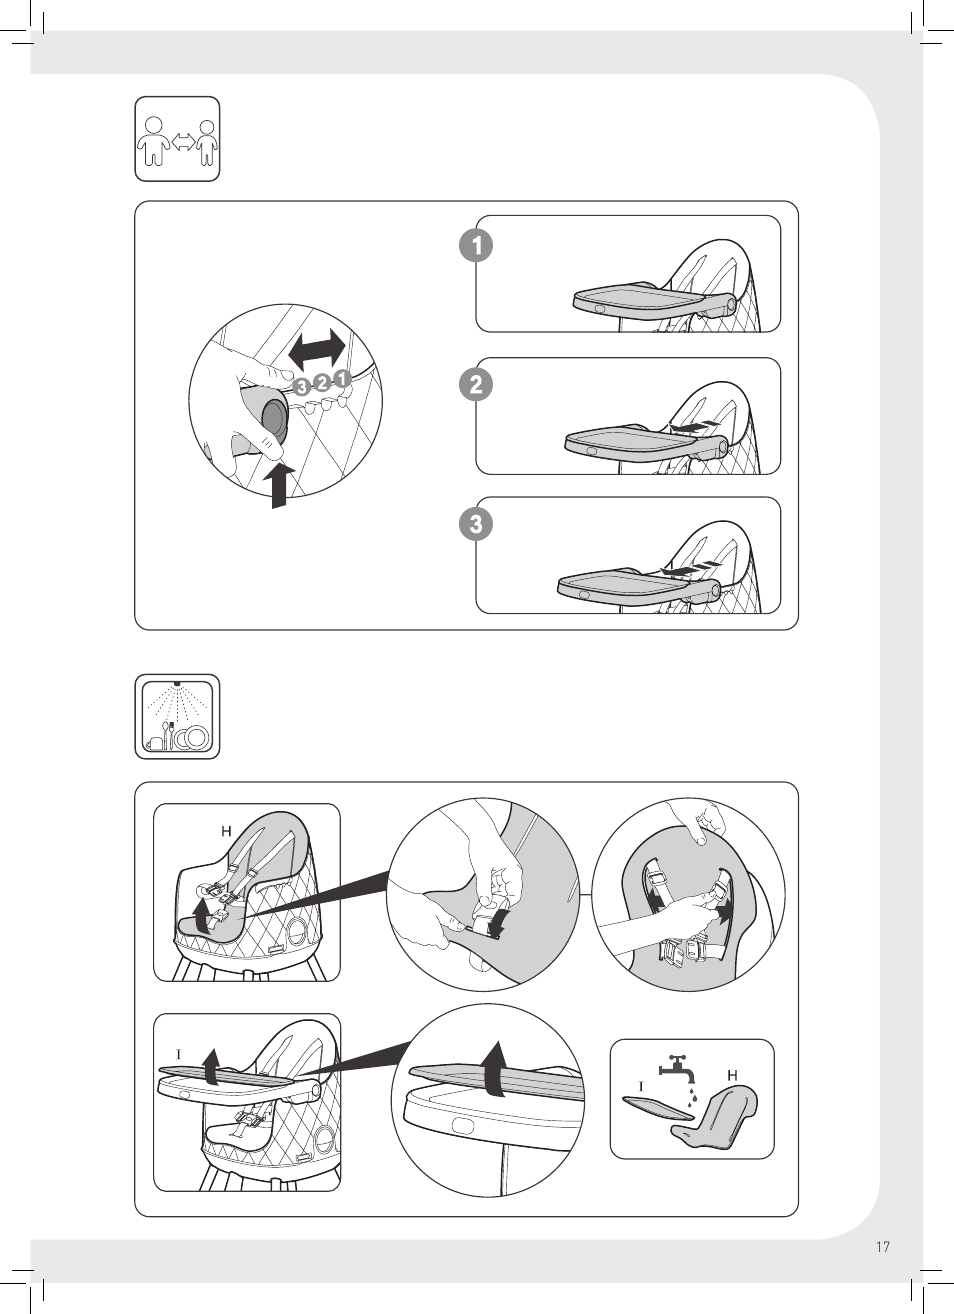 Keter Multi Dine High Chair User Manual Page 25 28